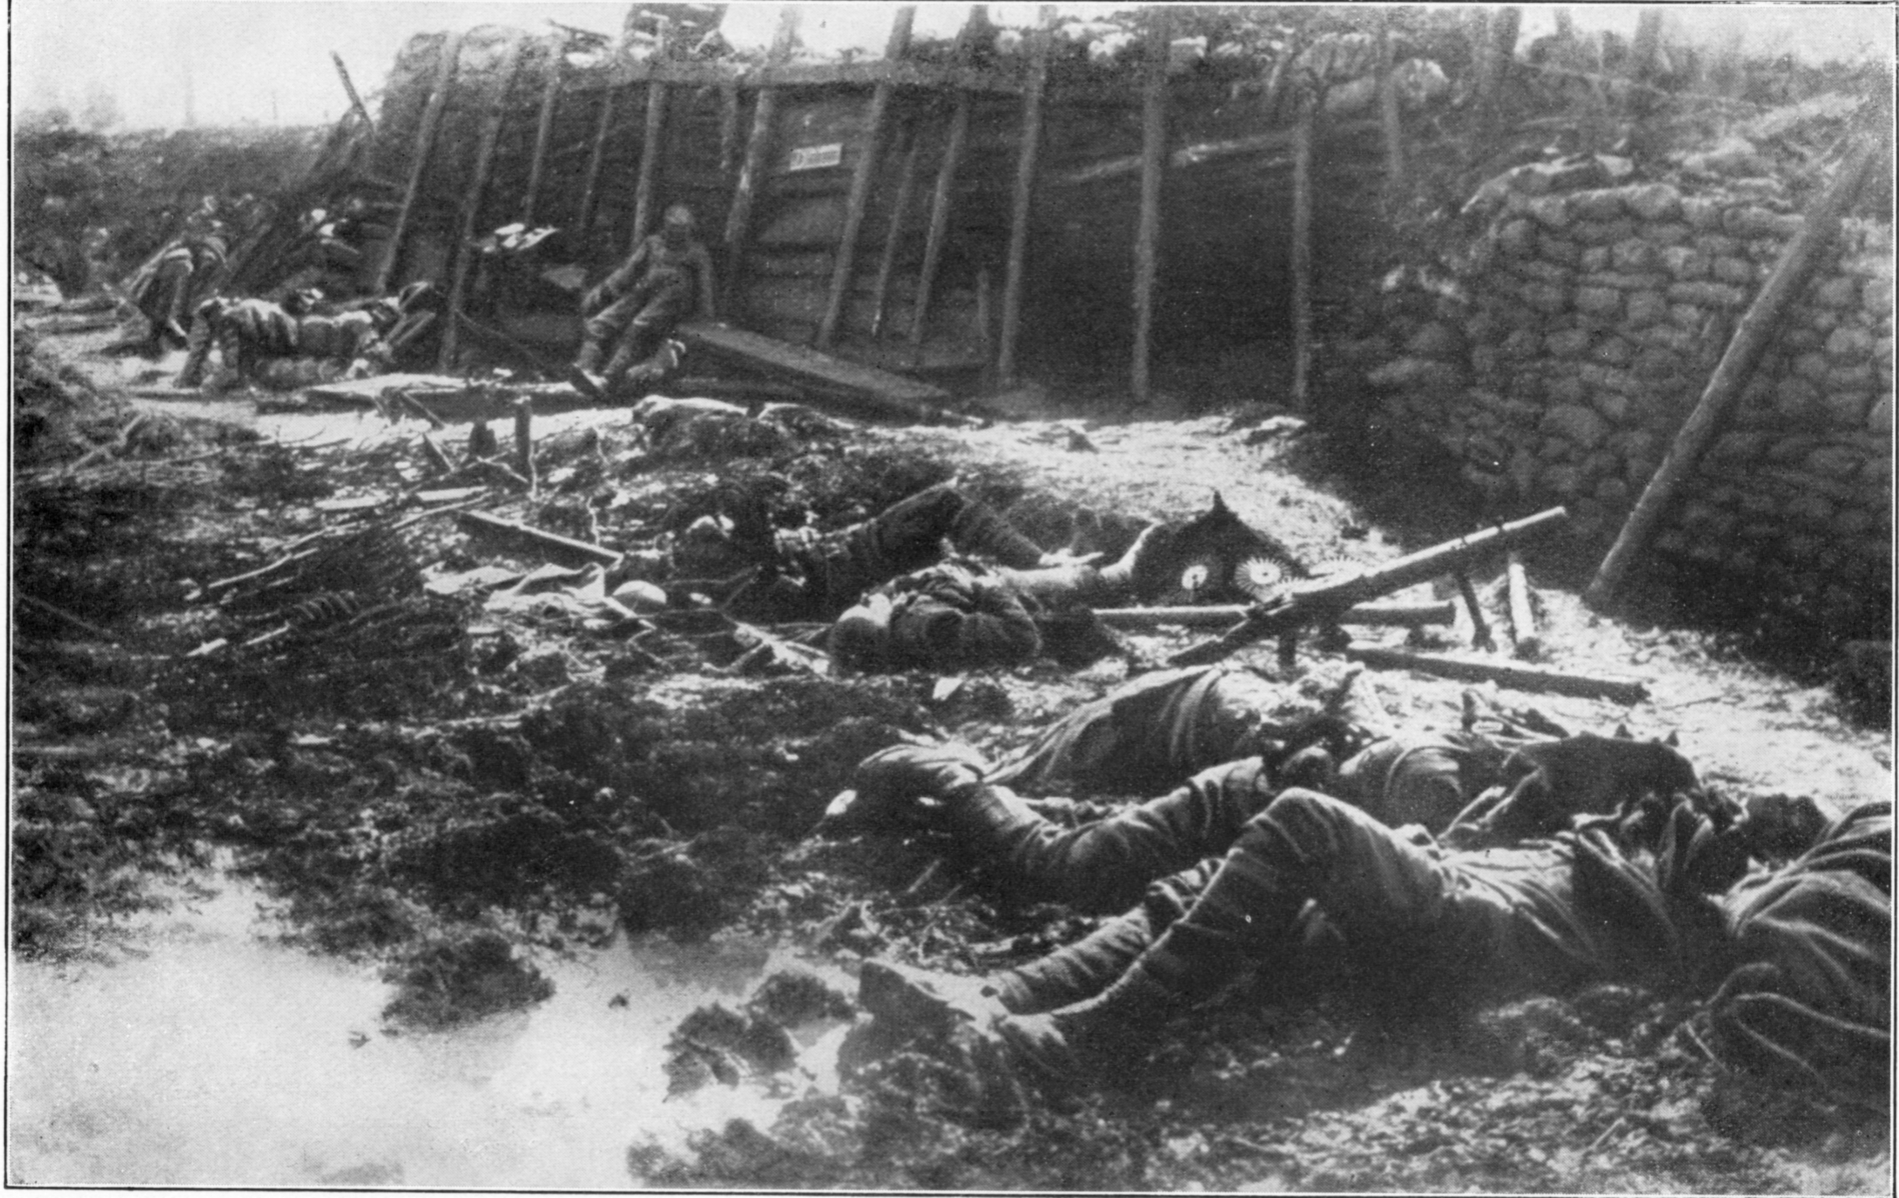 British emplacement after German gas attack